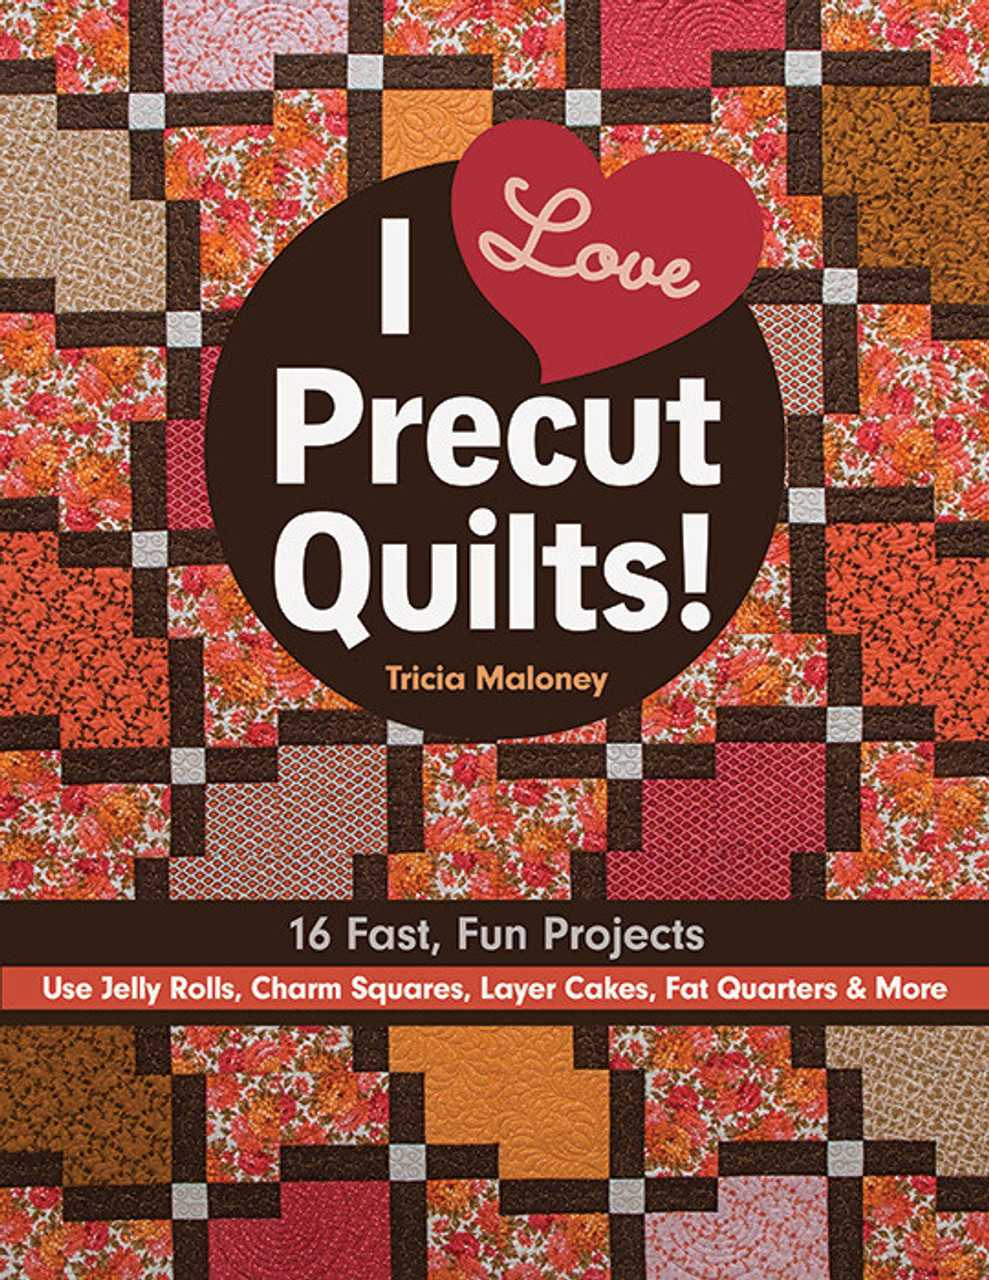 I Love Precut Quilts!: 16 Fast, Fun Projects - Use Jelly Rolls, Charm Squares, Layer Cakes, Fat Quarters and More [Book]